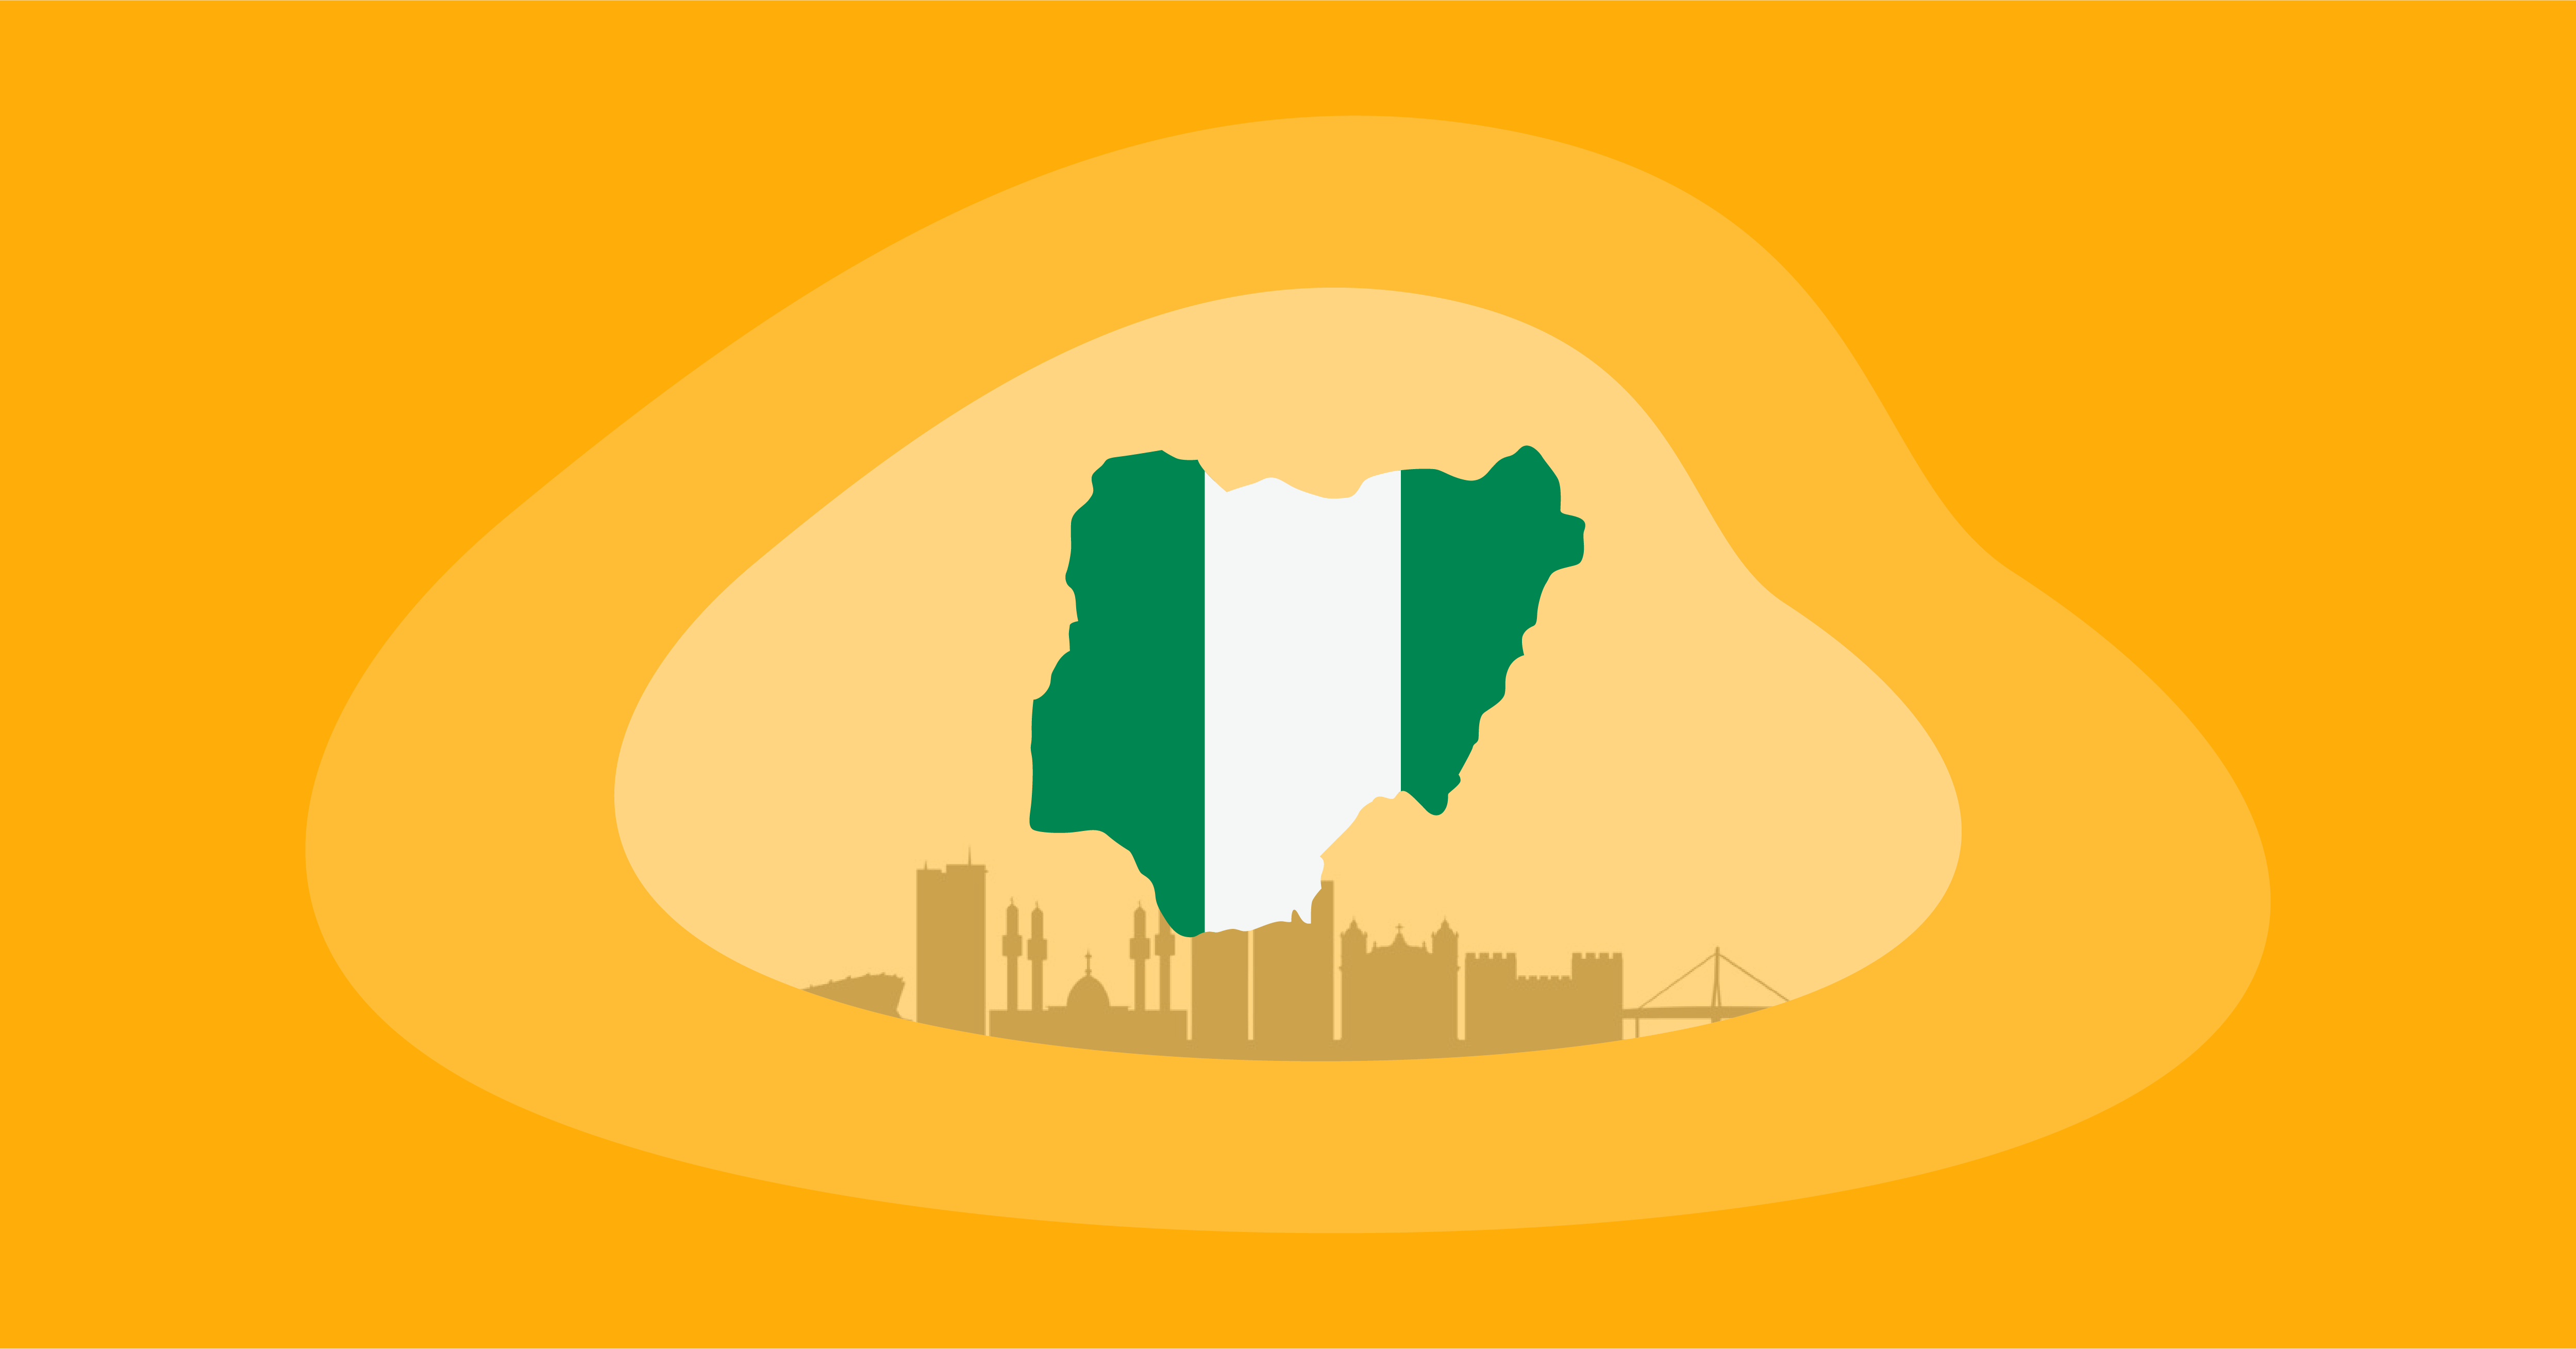 Illustration of the Nigerian country shape colored in the Nigerian flag